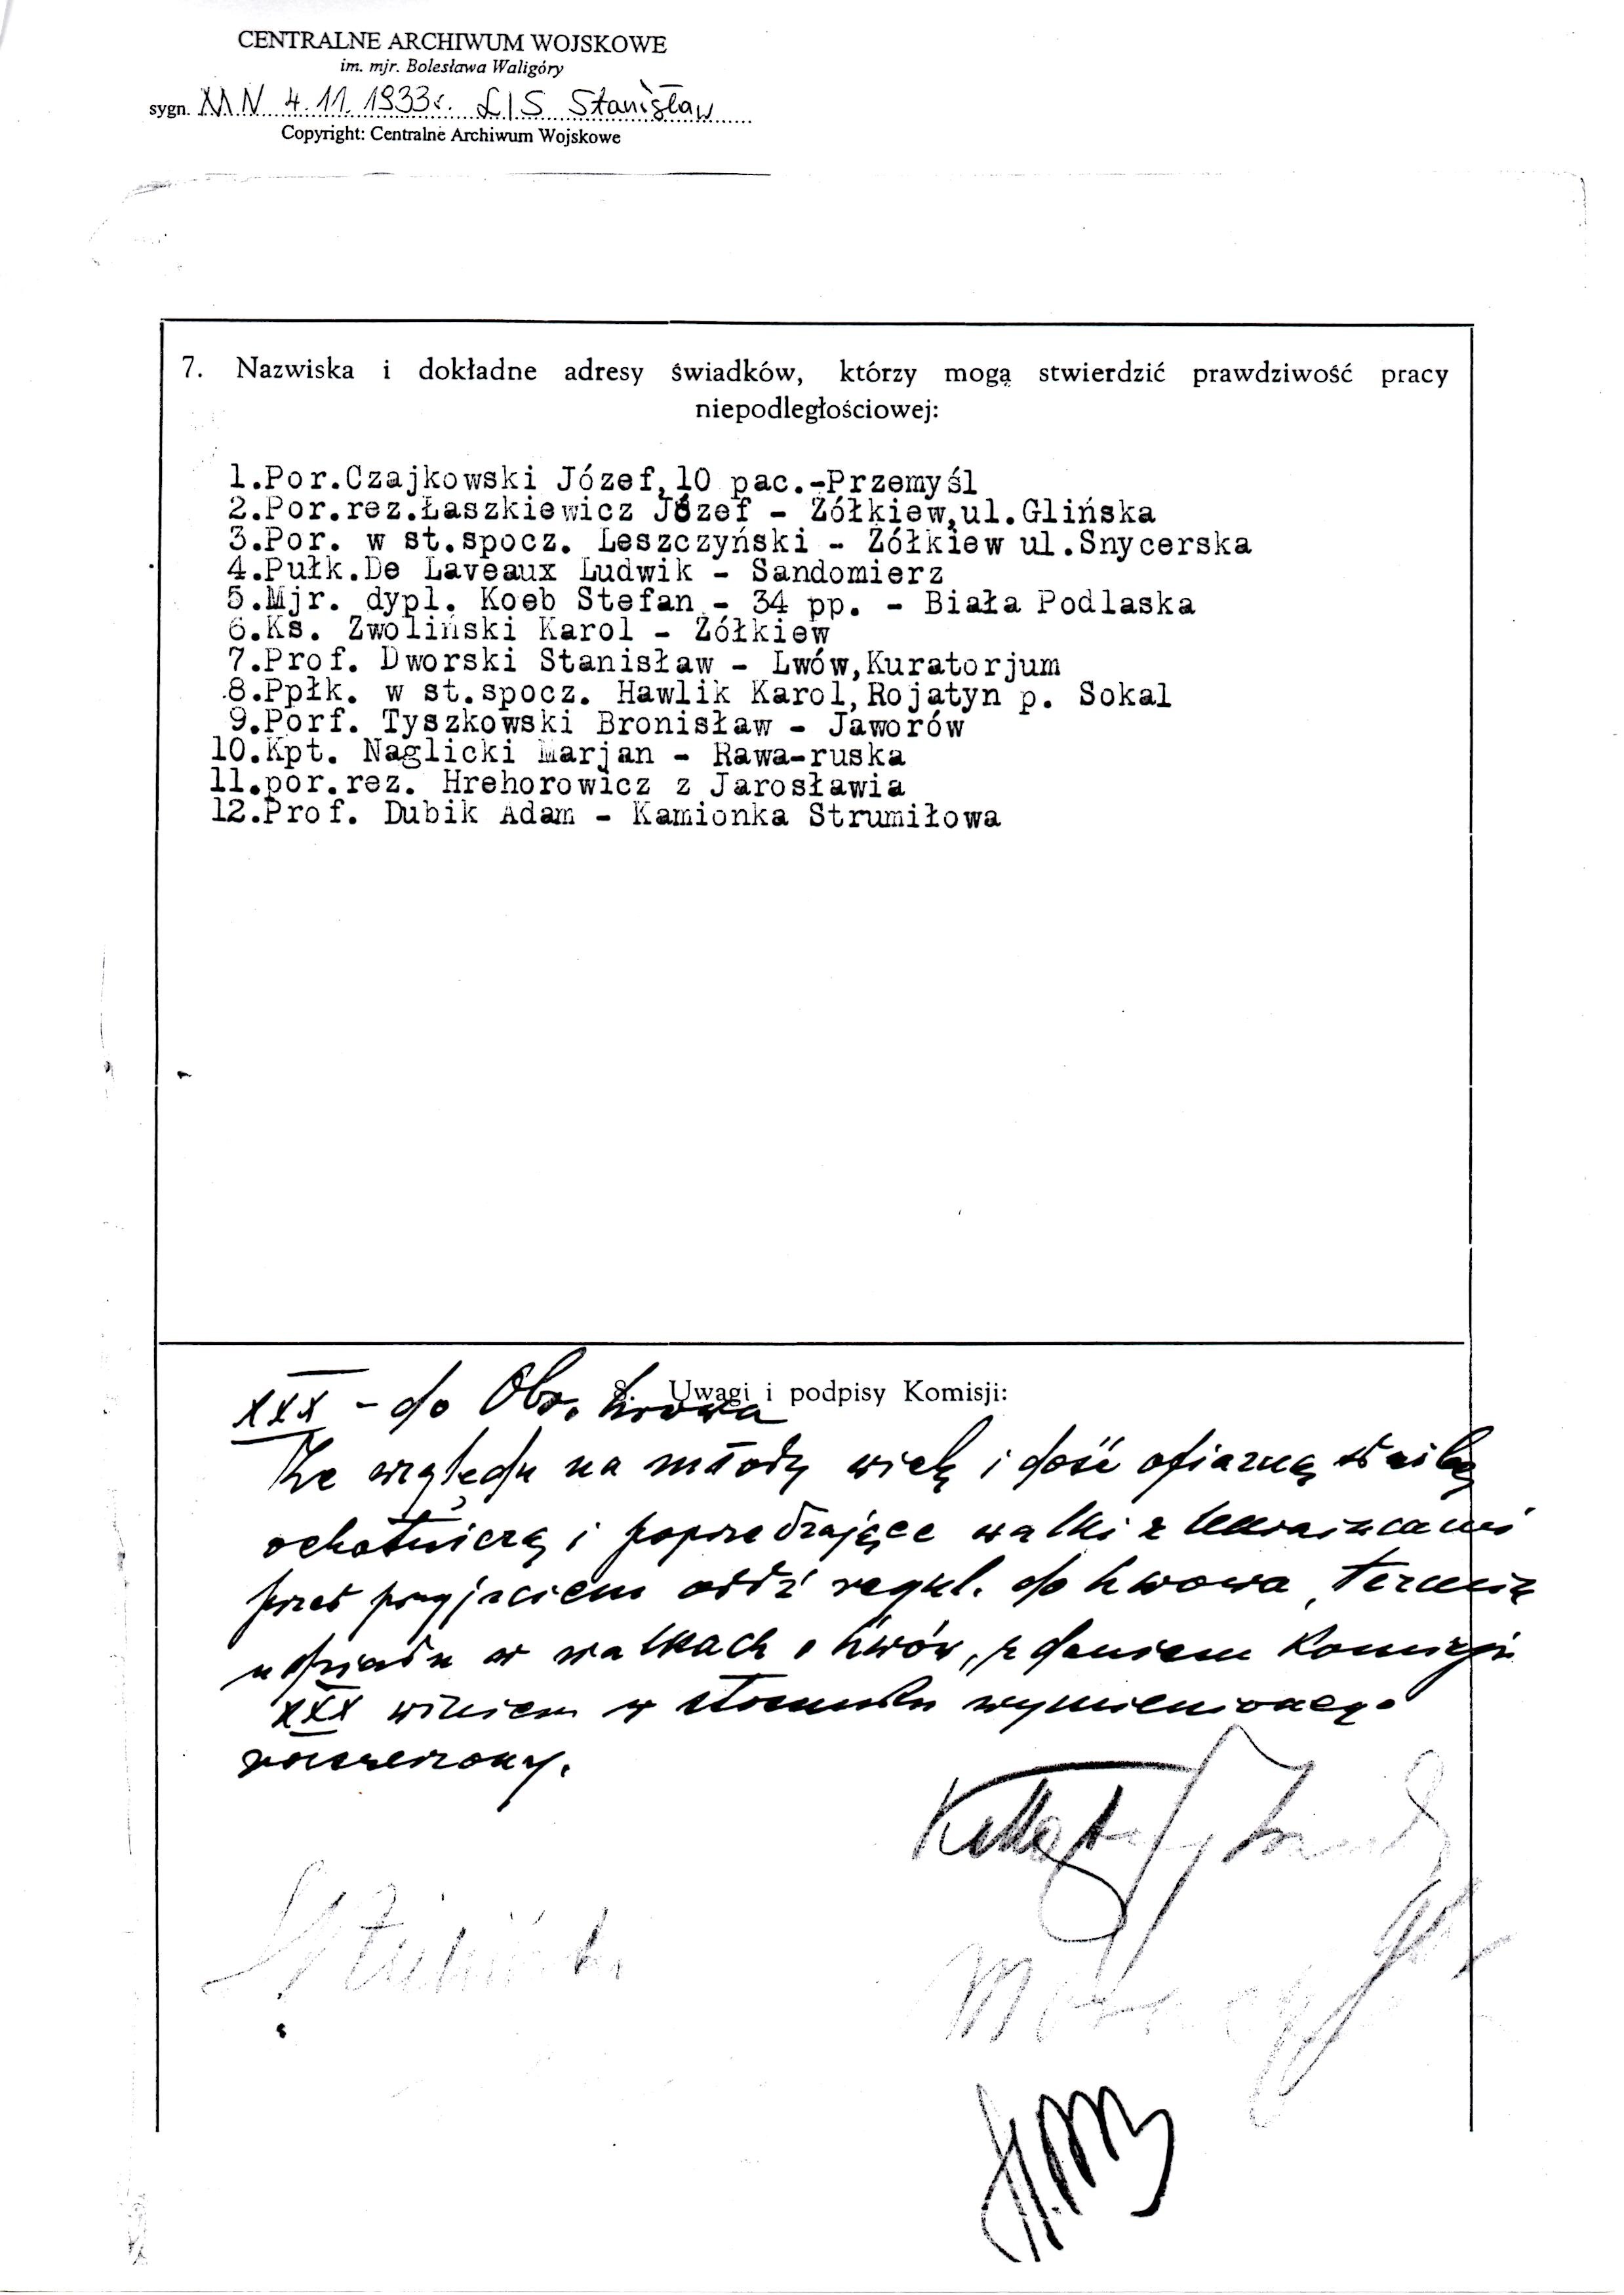 Stanislaw Lis Medal of Independance Document 2 Page 3.jpg